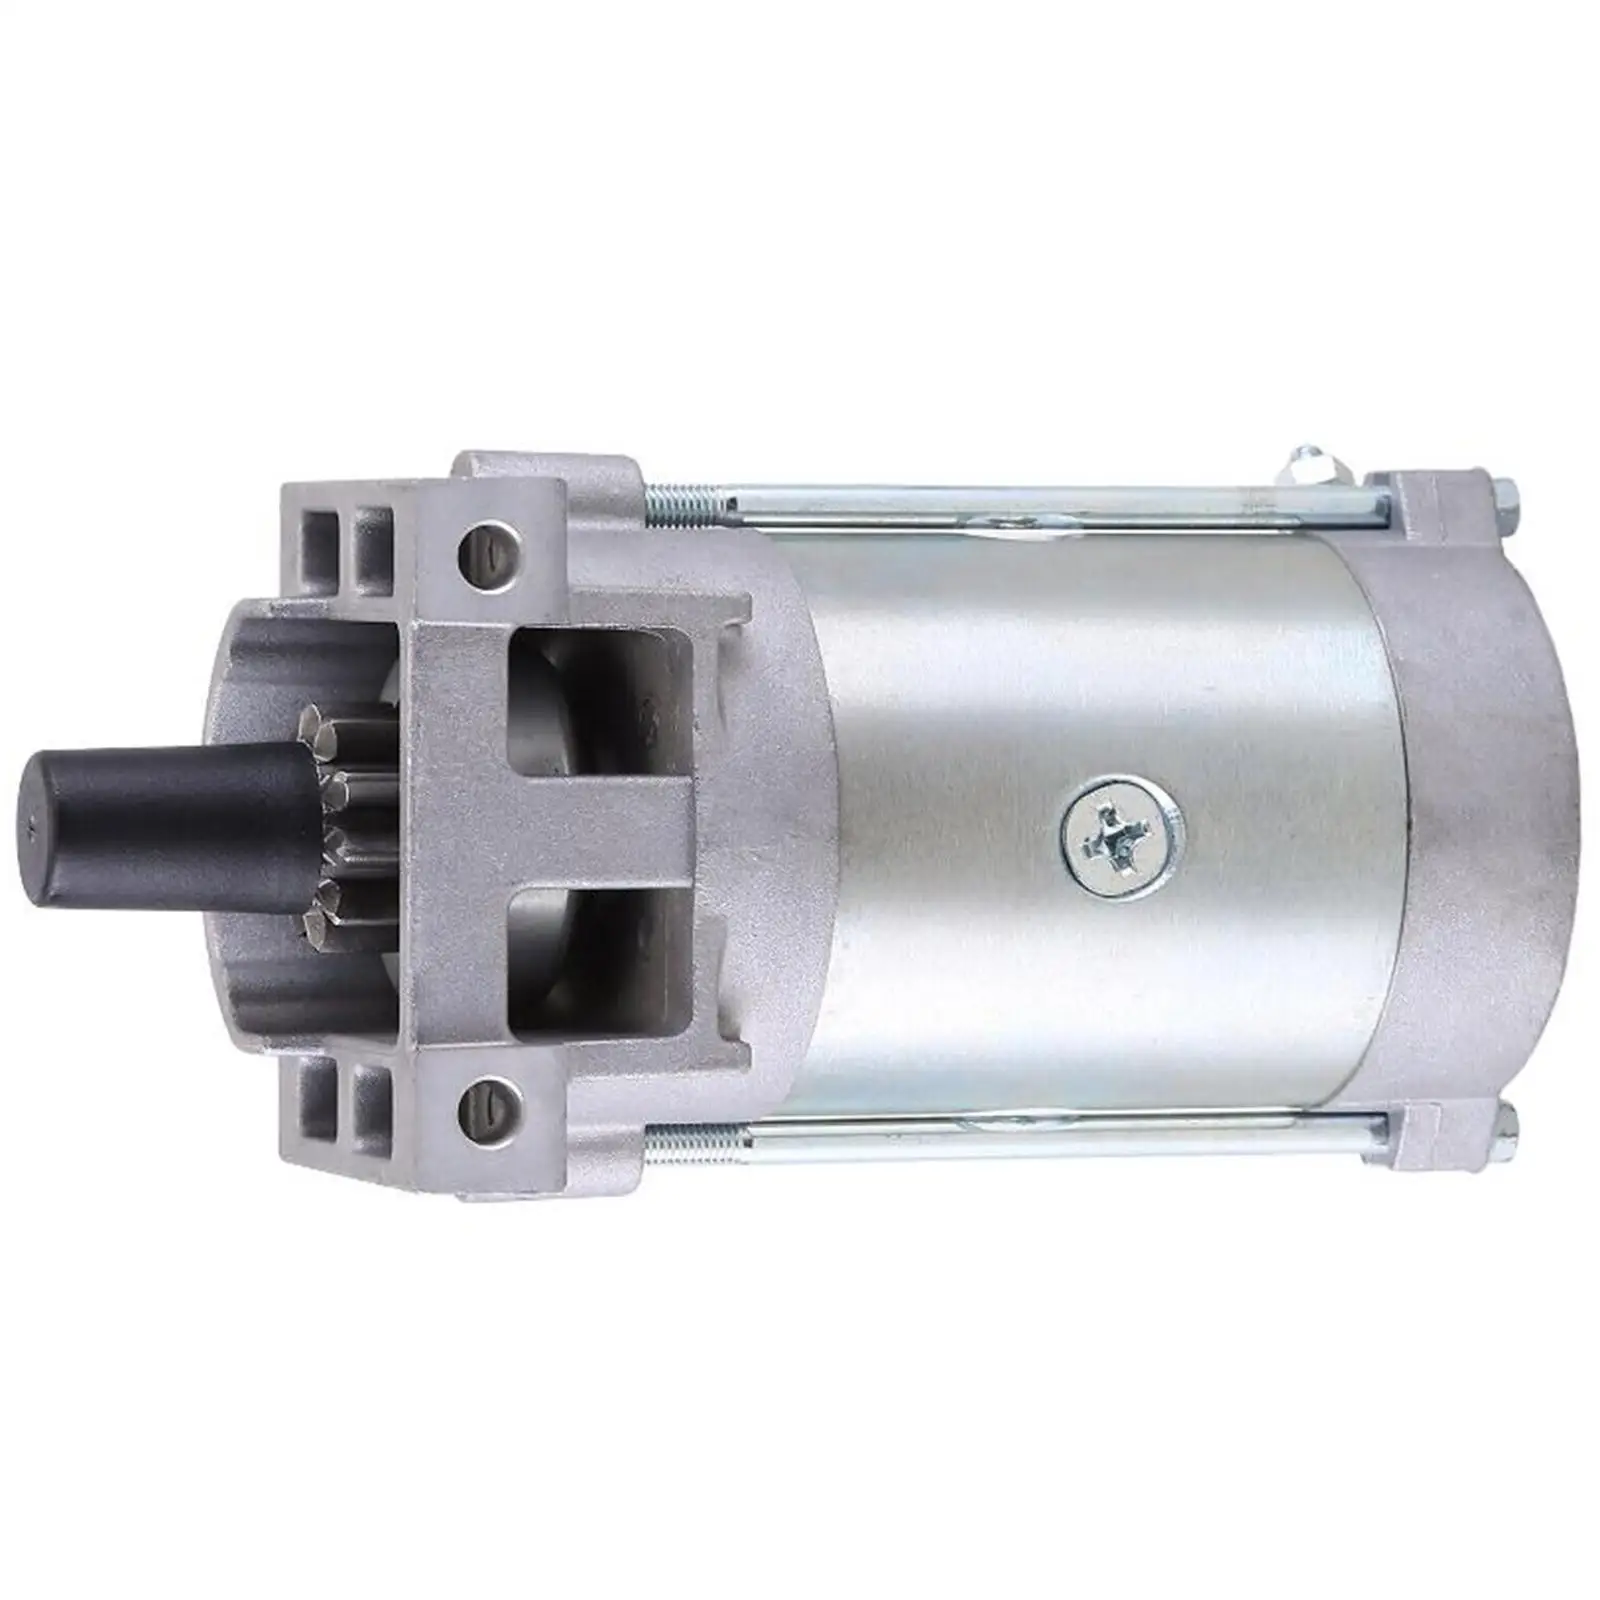 Starter Motor Replaces Easy to Install Professional Motors Starter Parts Durable 21110533 127-9209 133-1564 133-9828 136-7880